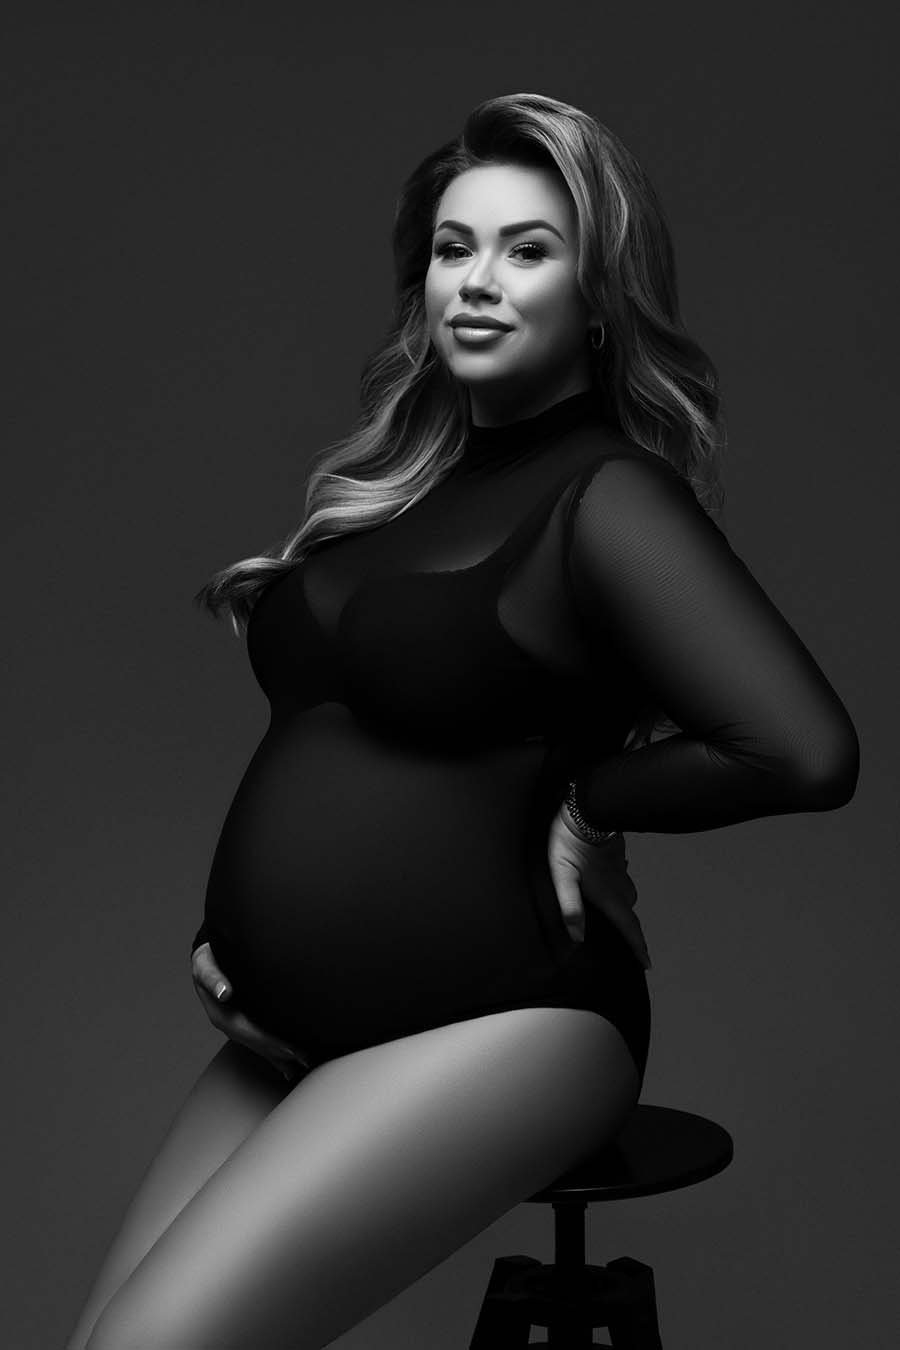 pregnant model is sitting in a stool while posing for a maternity photoshoot. she is wearing a transparent bodysuit made of mesh with a bra underneath. she is facing the camera and holding her back and belly with her hands. her hair is long and blond and the photo is black and white. 